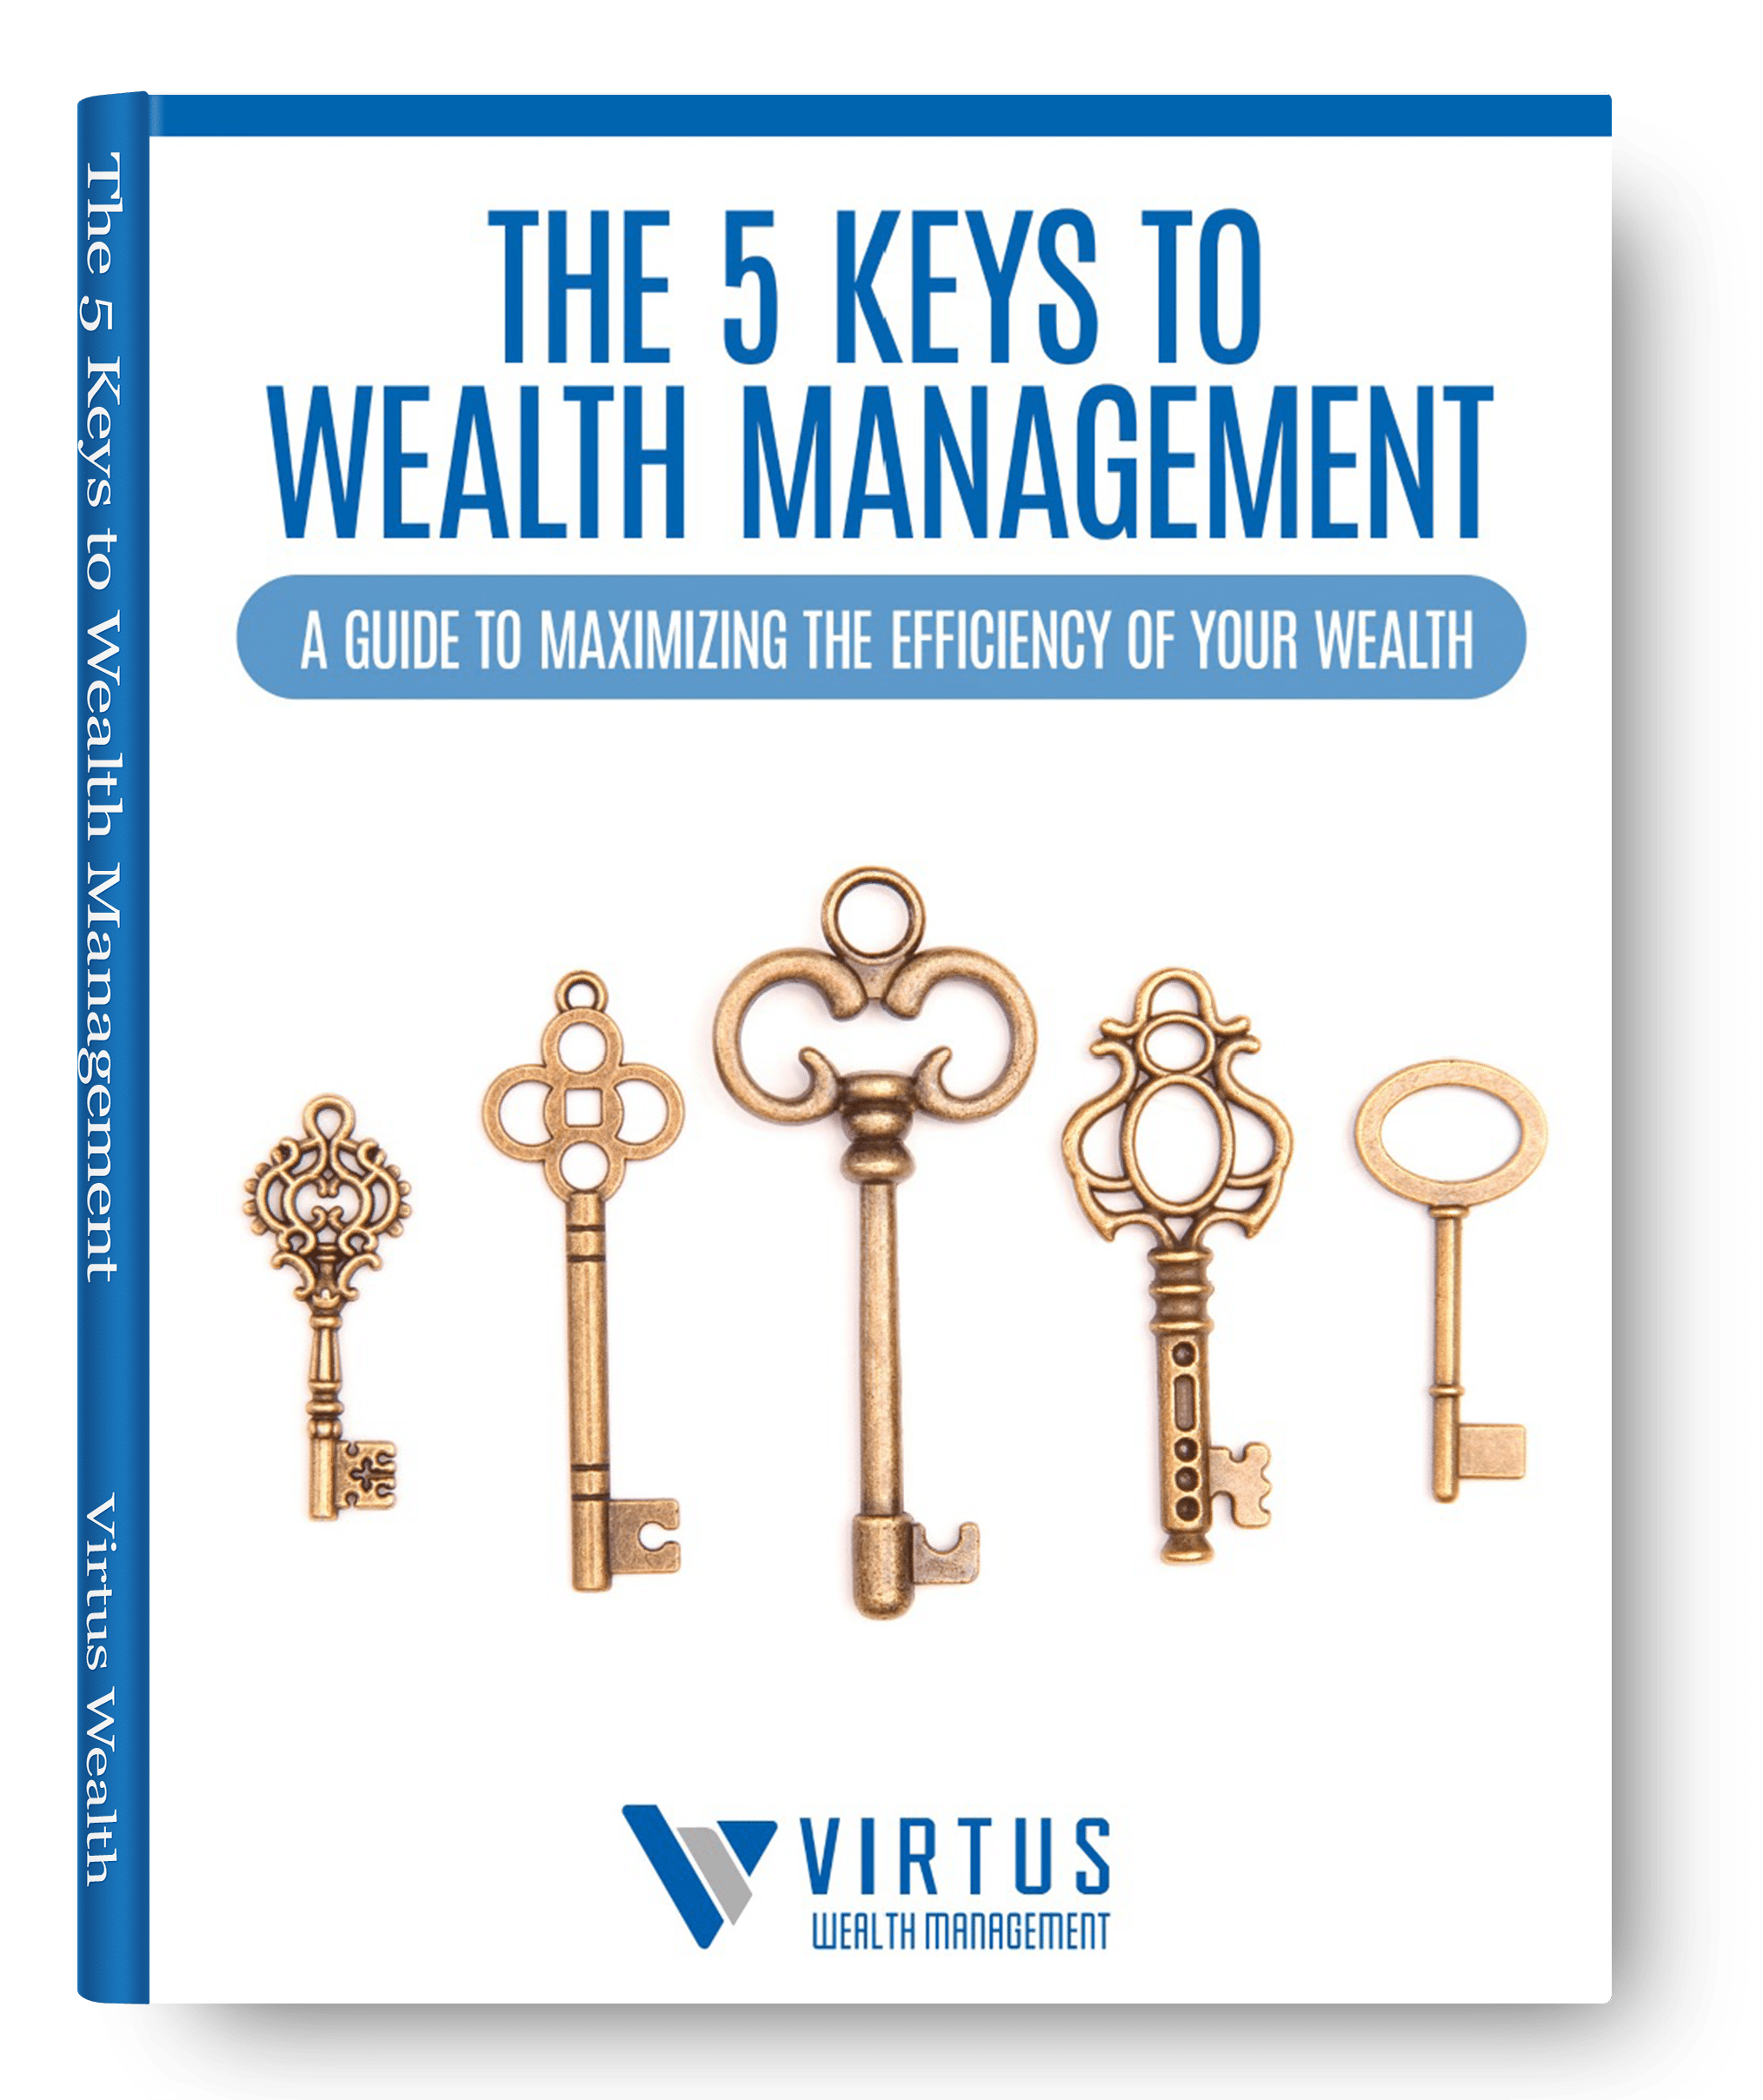 The 5 Keys to Wealth Management